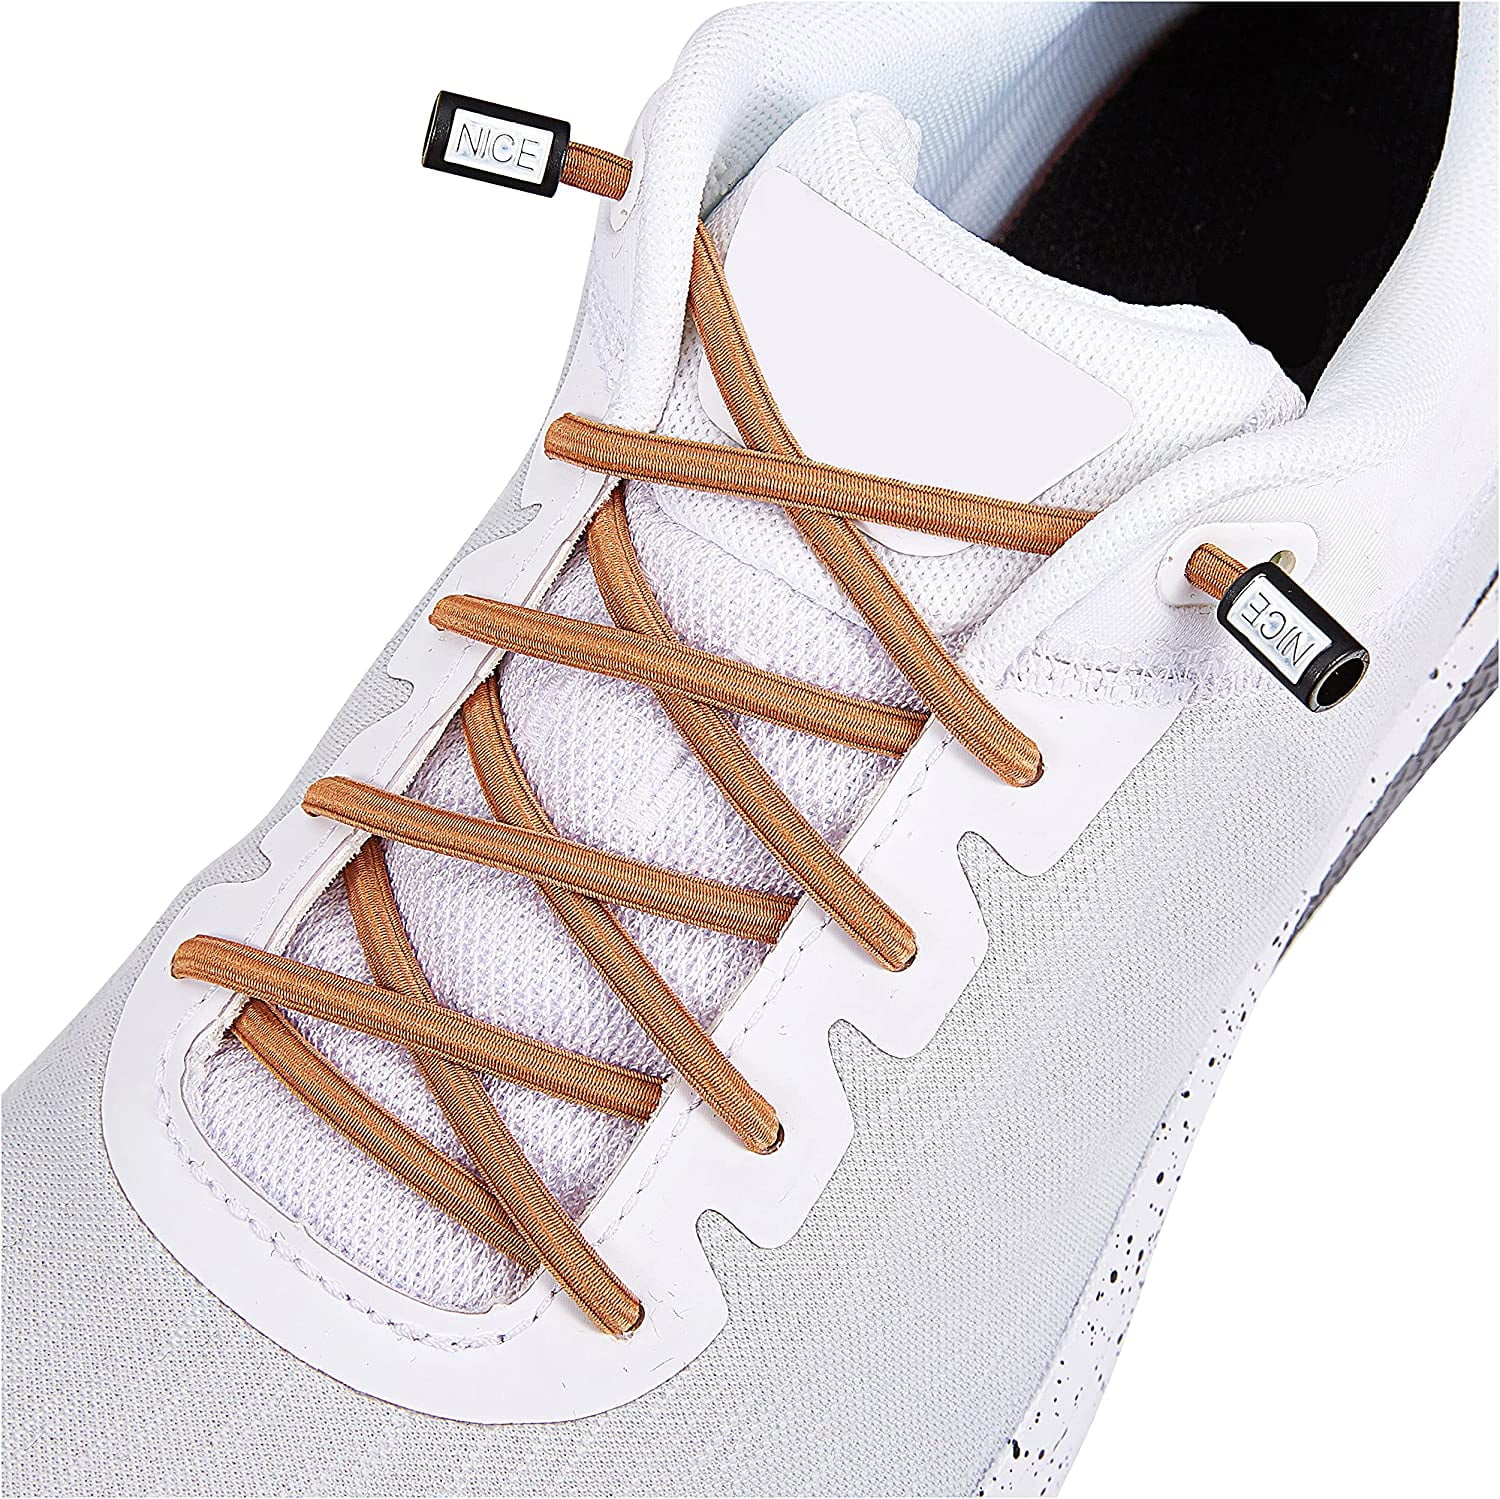 at donere Trickle komme til syne Elastic Shoelaces No-Tie Lacing System for Kids and Adult Shoes . Elastic  Shoe laces for Sneakers - Walmart.com